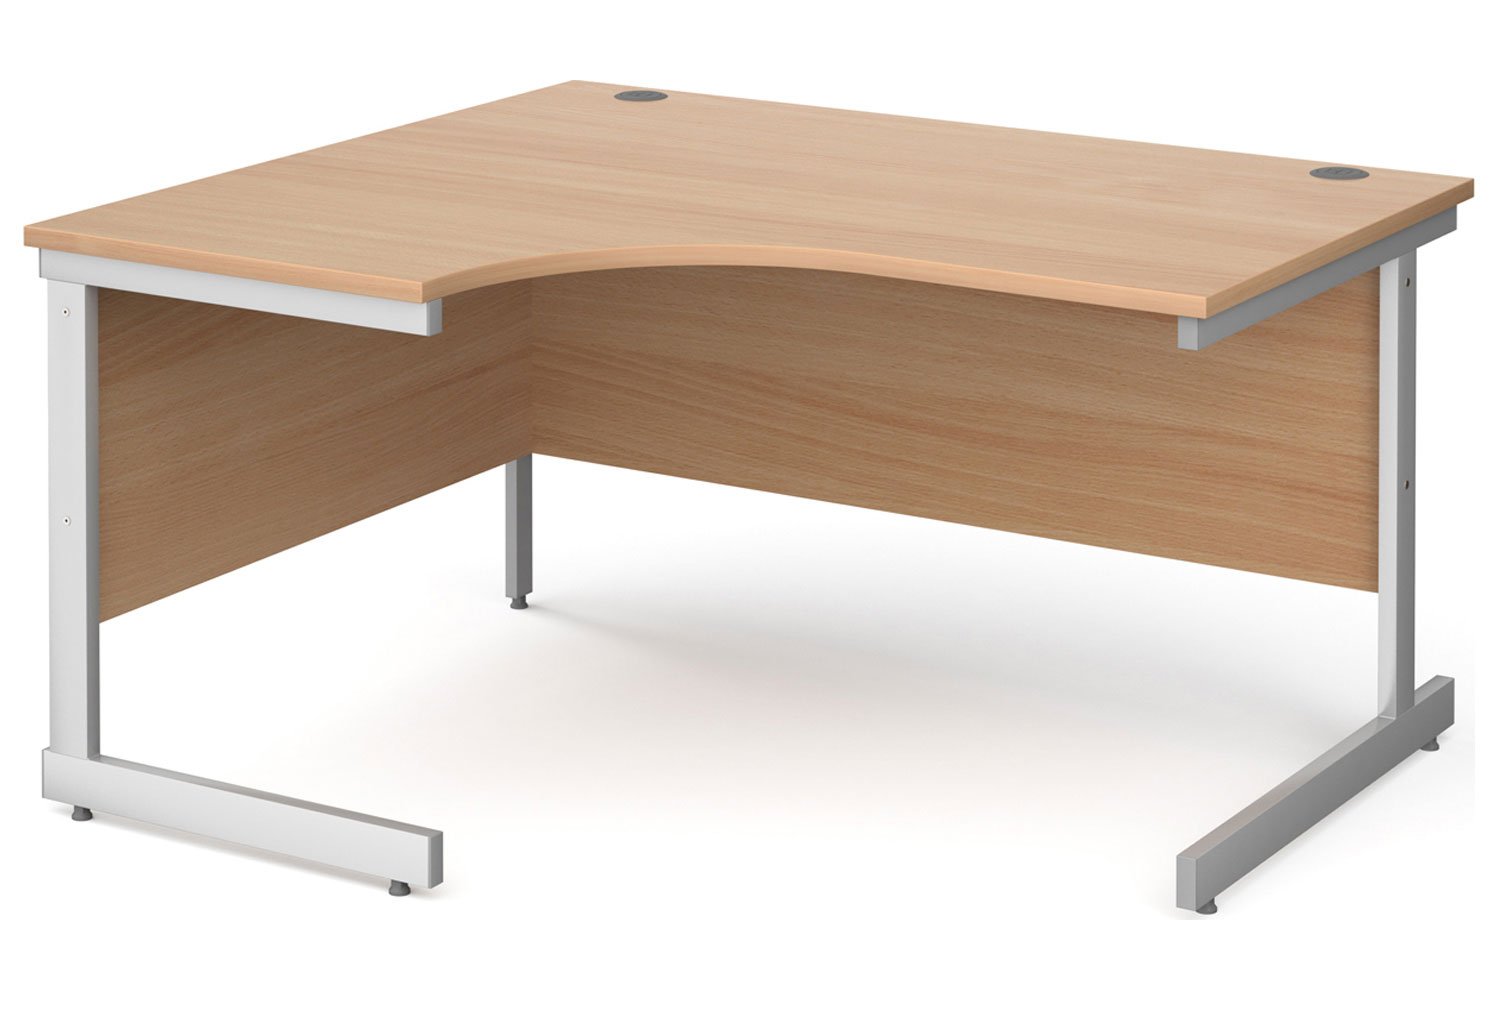 Thrifty Next-Day Left Hand Ergonomic Office Desk Beech, 140wx120/80dx73h (cm), Express Delivery